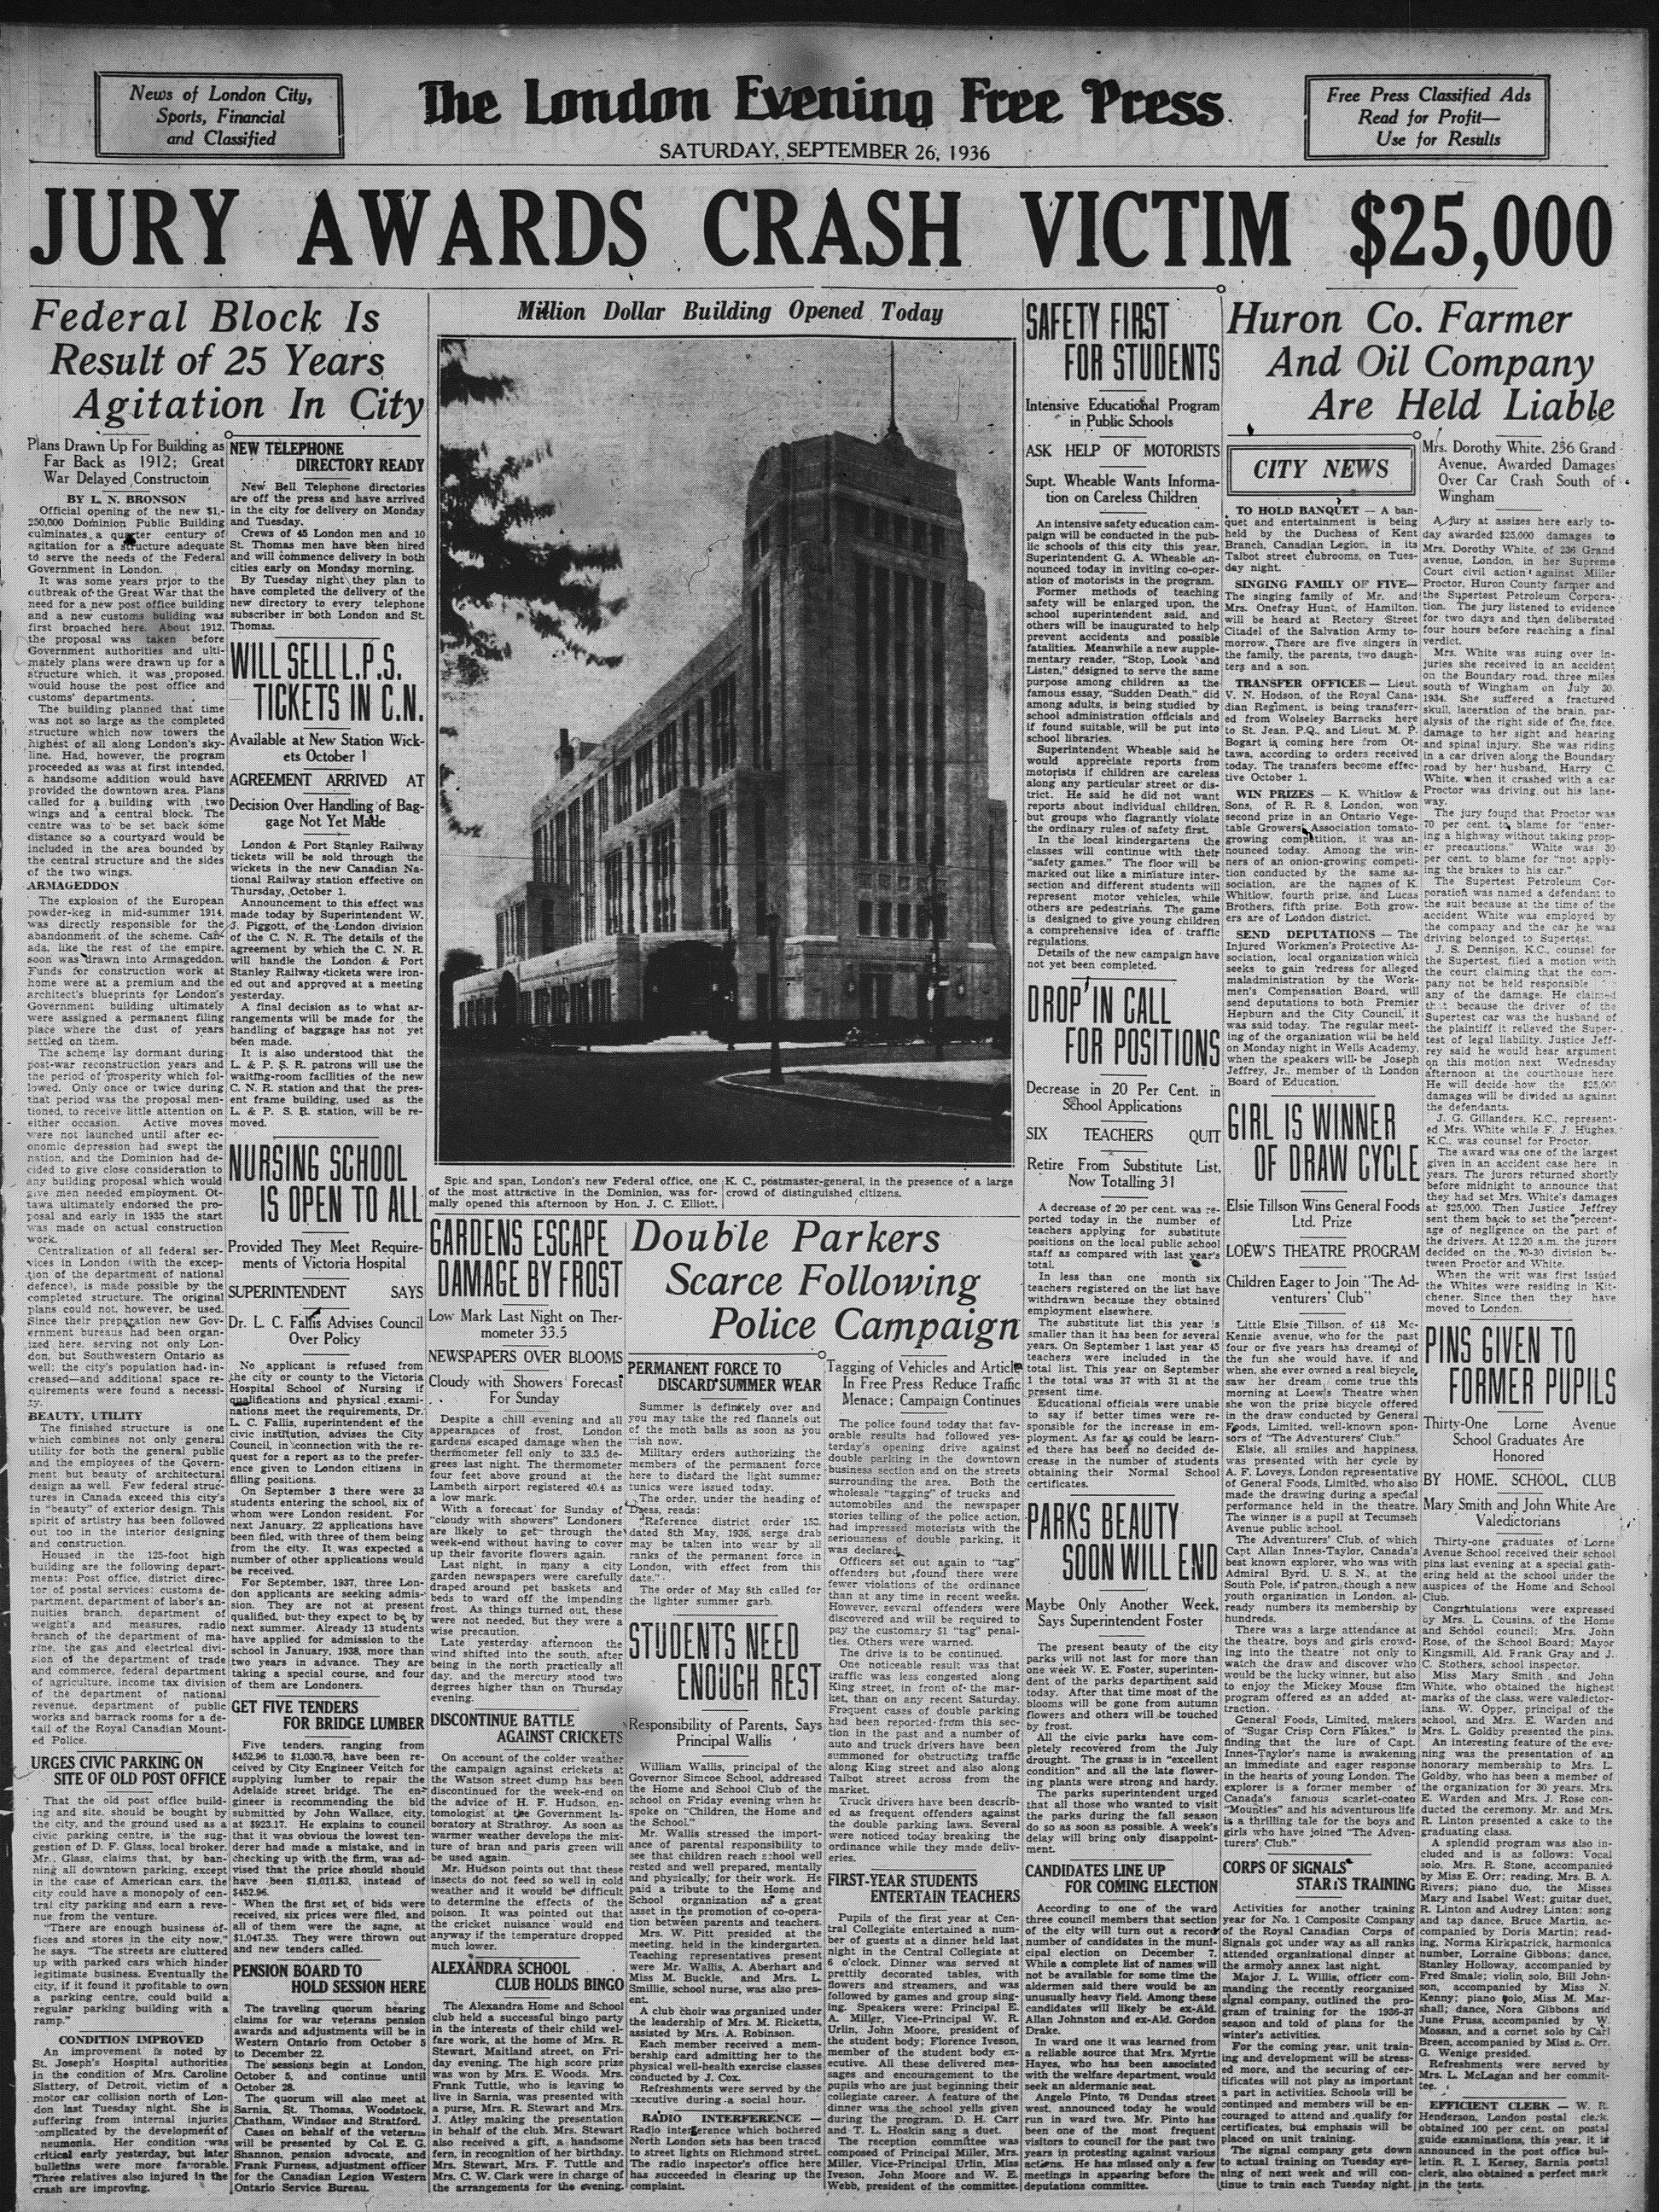 The Dominion Public Building: Inauguration - September 1936